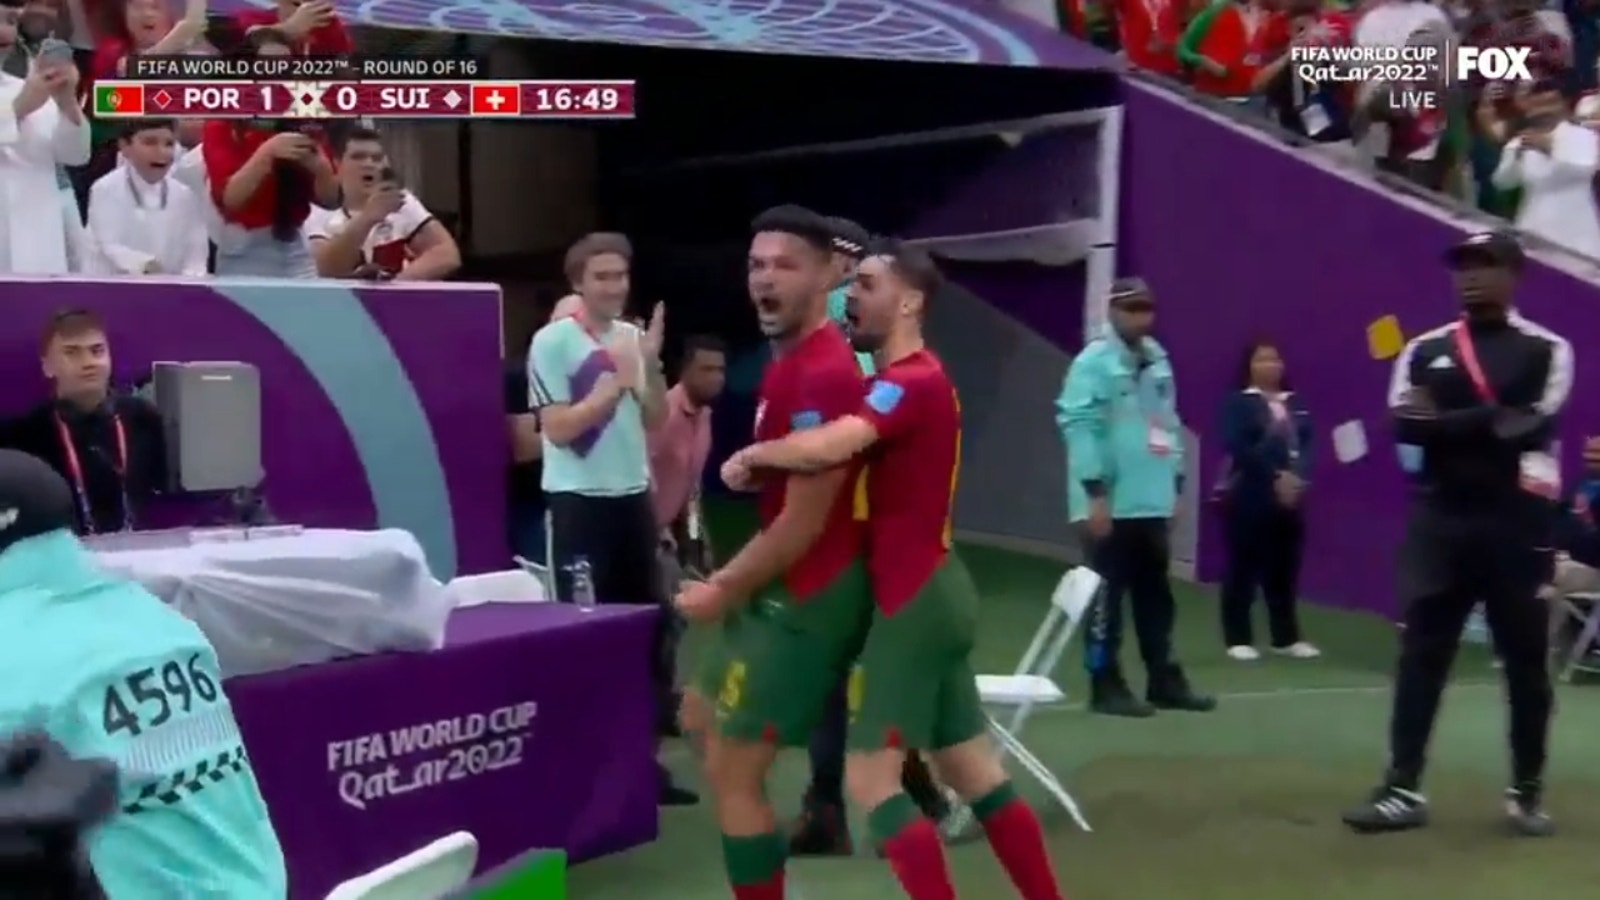 Portugal's Goncalo Ramos scores a hat trick against Switzerland